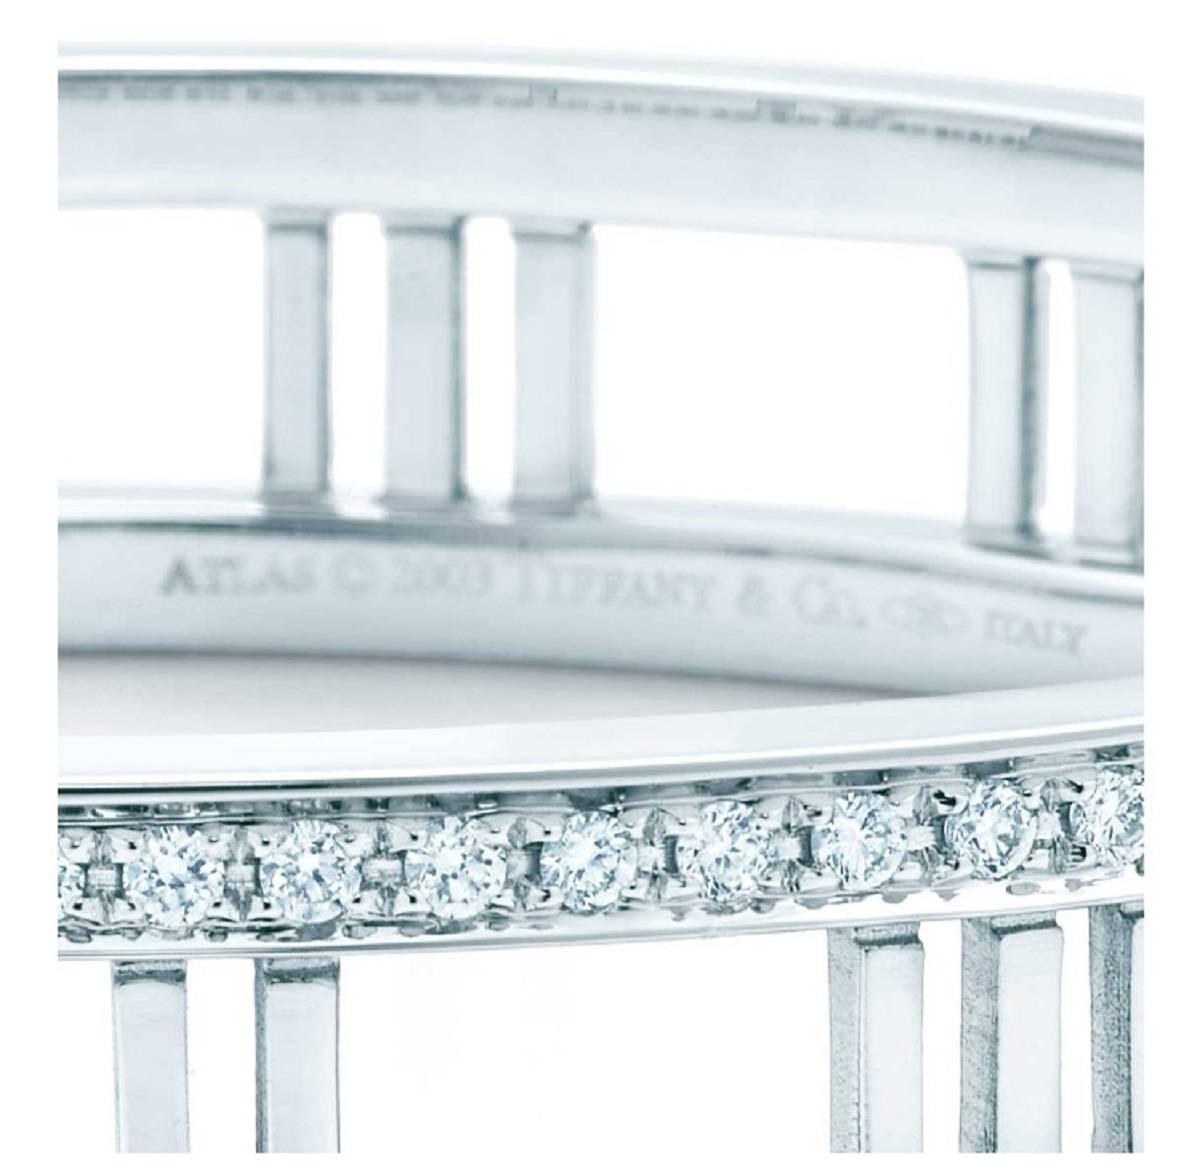 Signed Tiffany & Co. ATLAS Collection Open Hinged Bangle Bracelet
Streamlined and modern, the Atlas collection shines with graphic sophistication and bold simplicity. Dazzling diamonds complement the strong lines of this bangle's numeral